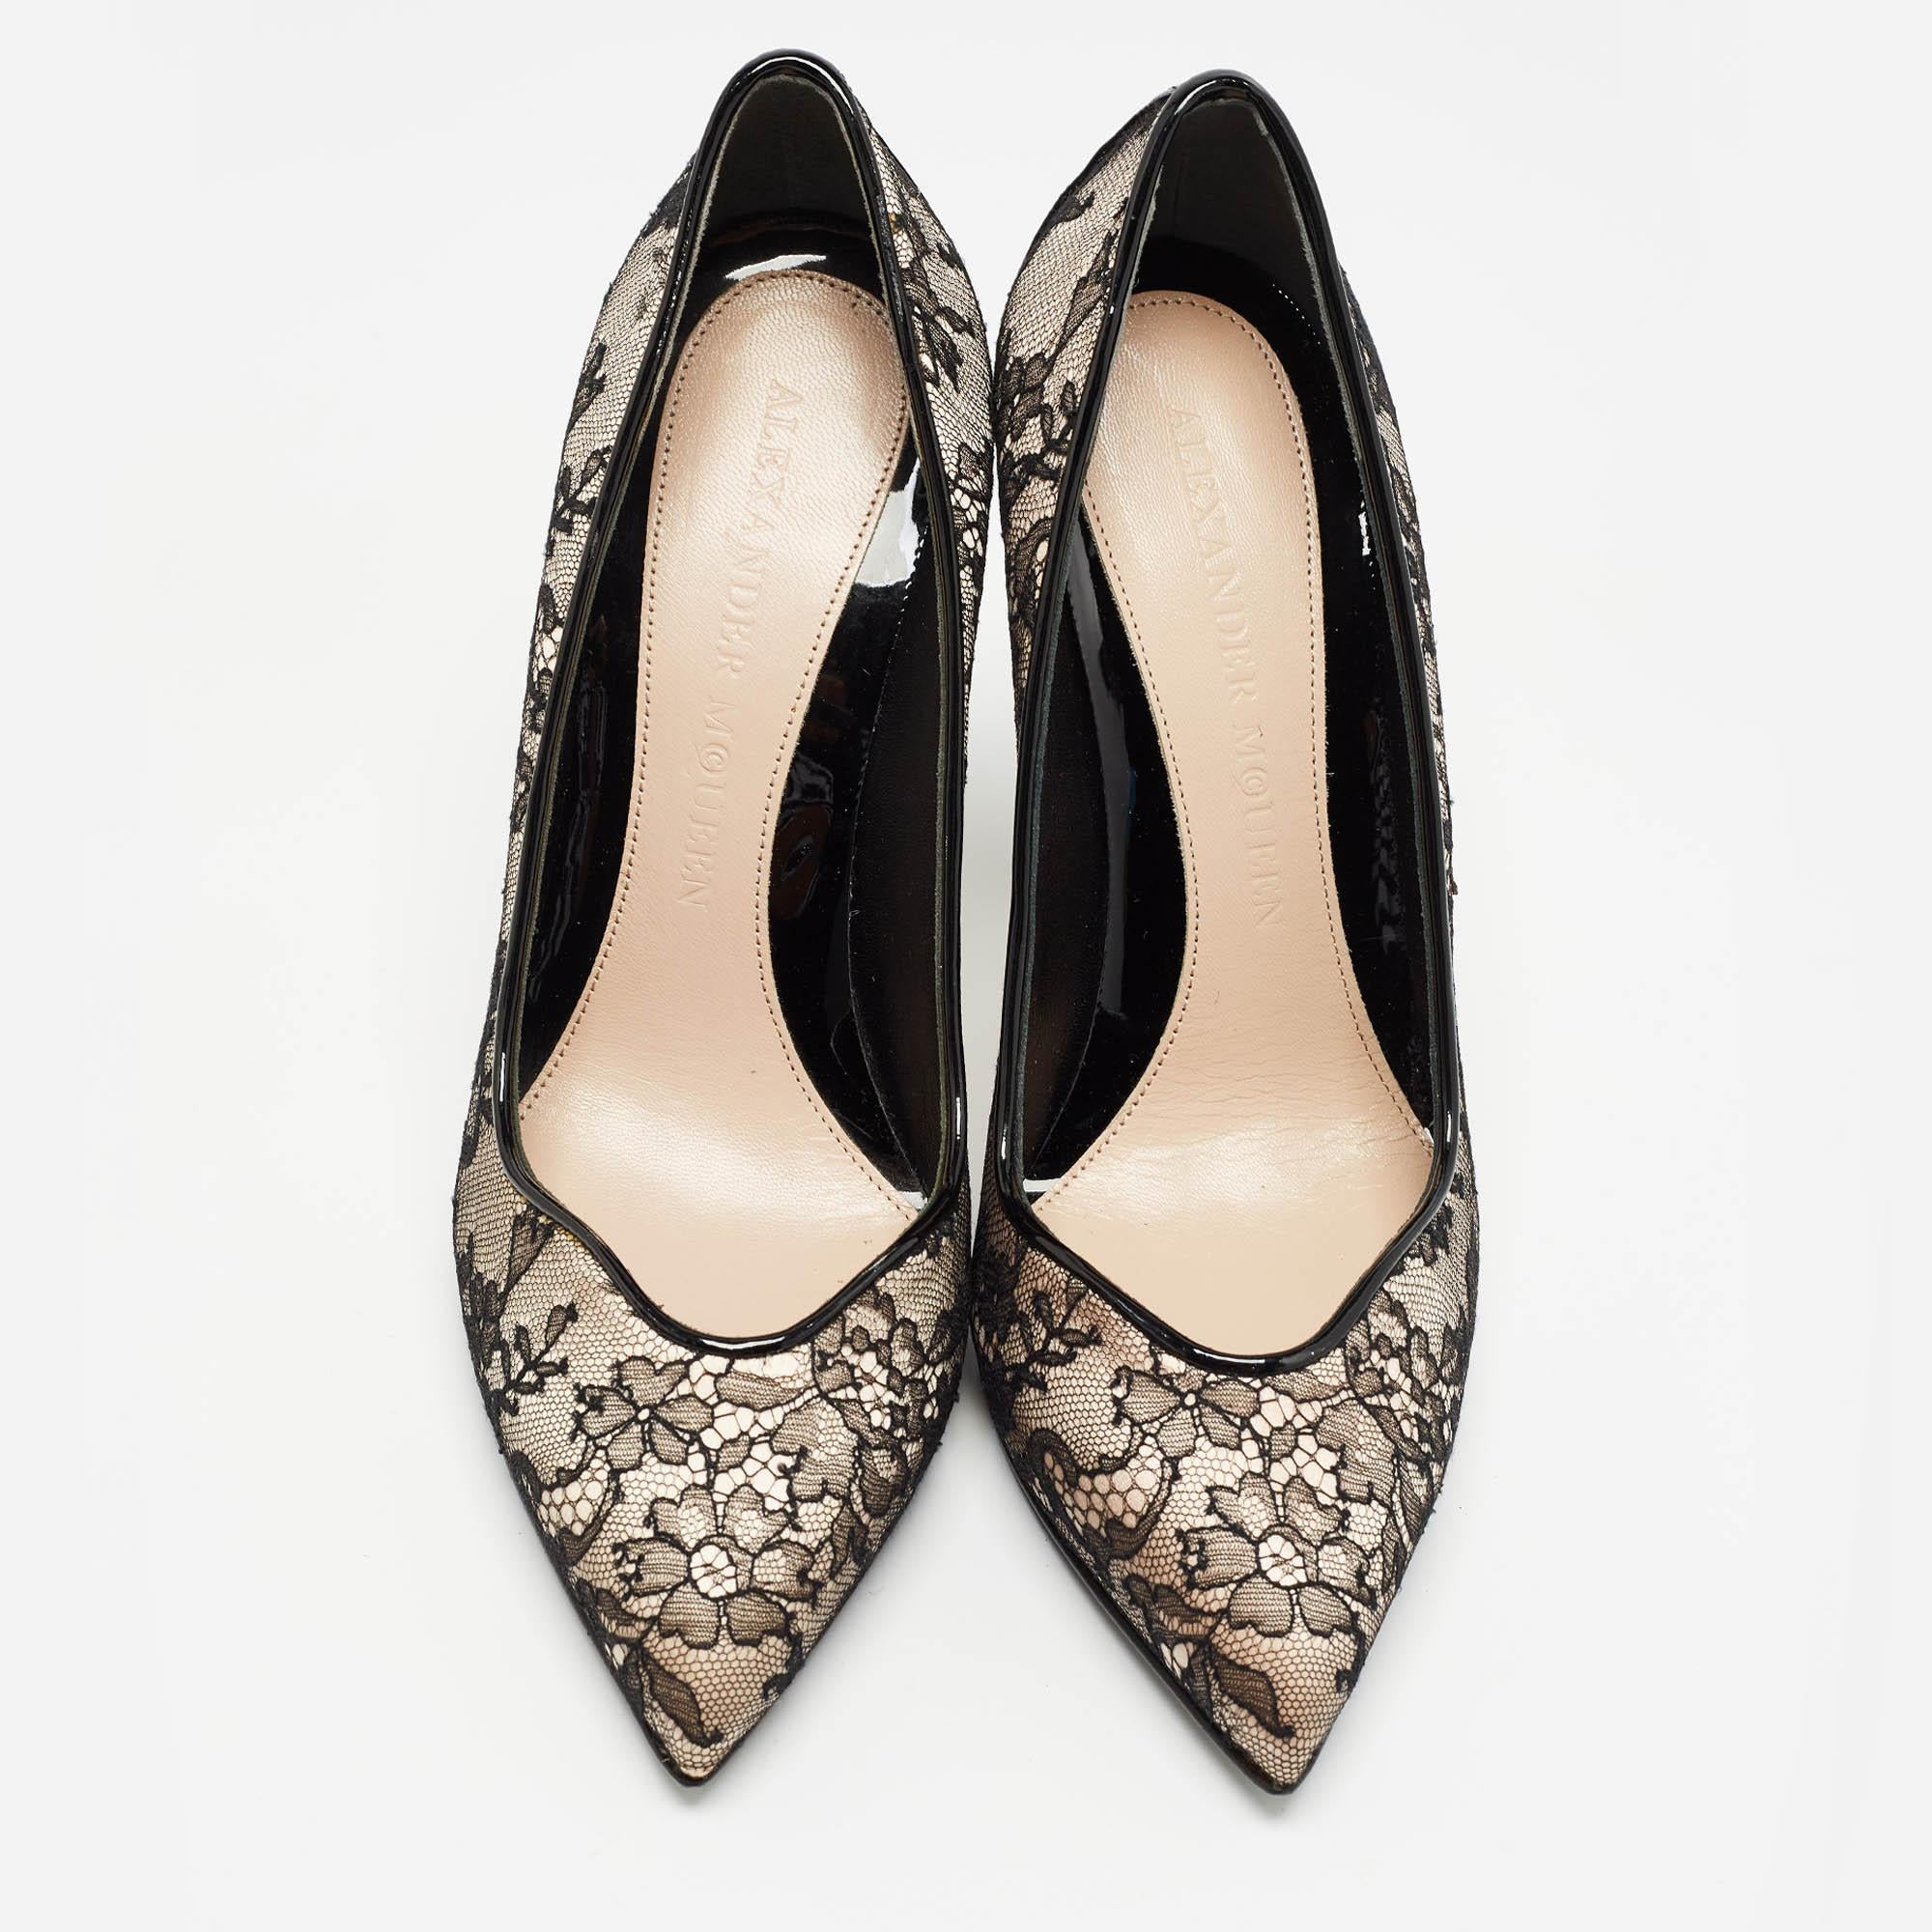 Exuding femininity and elegance, these pumps feature a chic silhouette with an attractive design. You can wear these pumps for a stylish look.

Includes: Original Box

